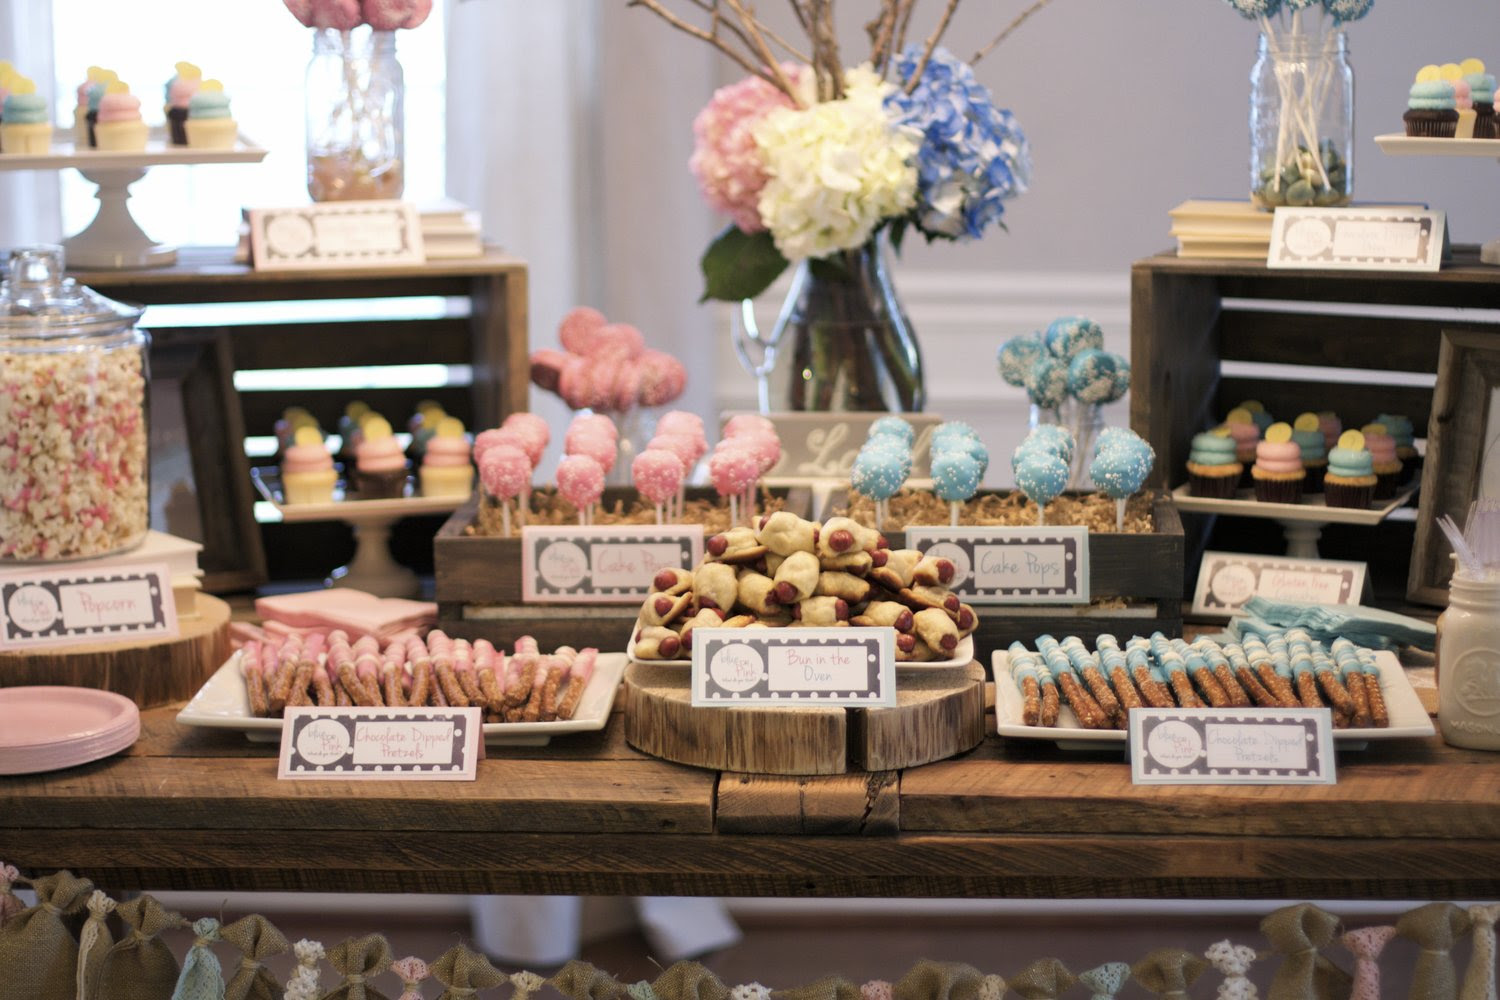 Many parents mark the occasion by celebrating with family and friends at a gender reveal party. Blue Or Pink What Do You Think Gender Reveal Party Sweetwood Creative Co Atlanta Wedding Planner Upscale Event Design